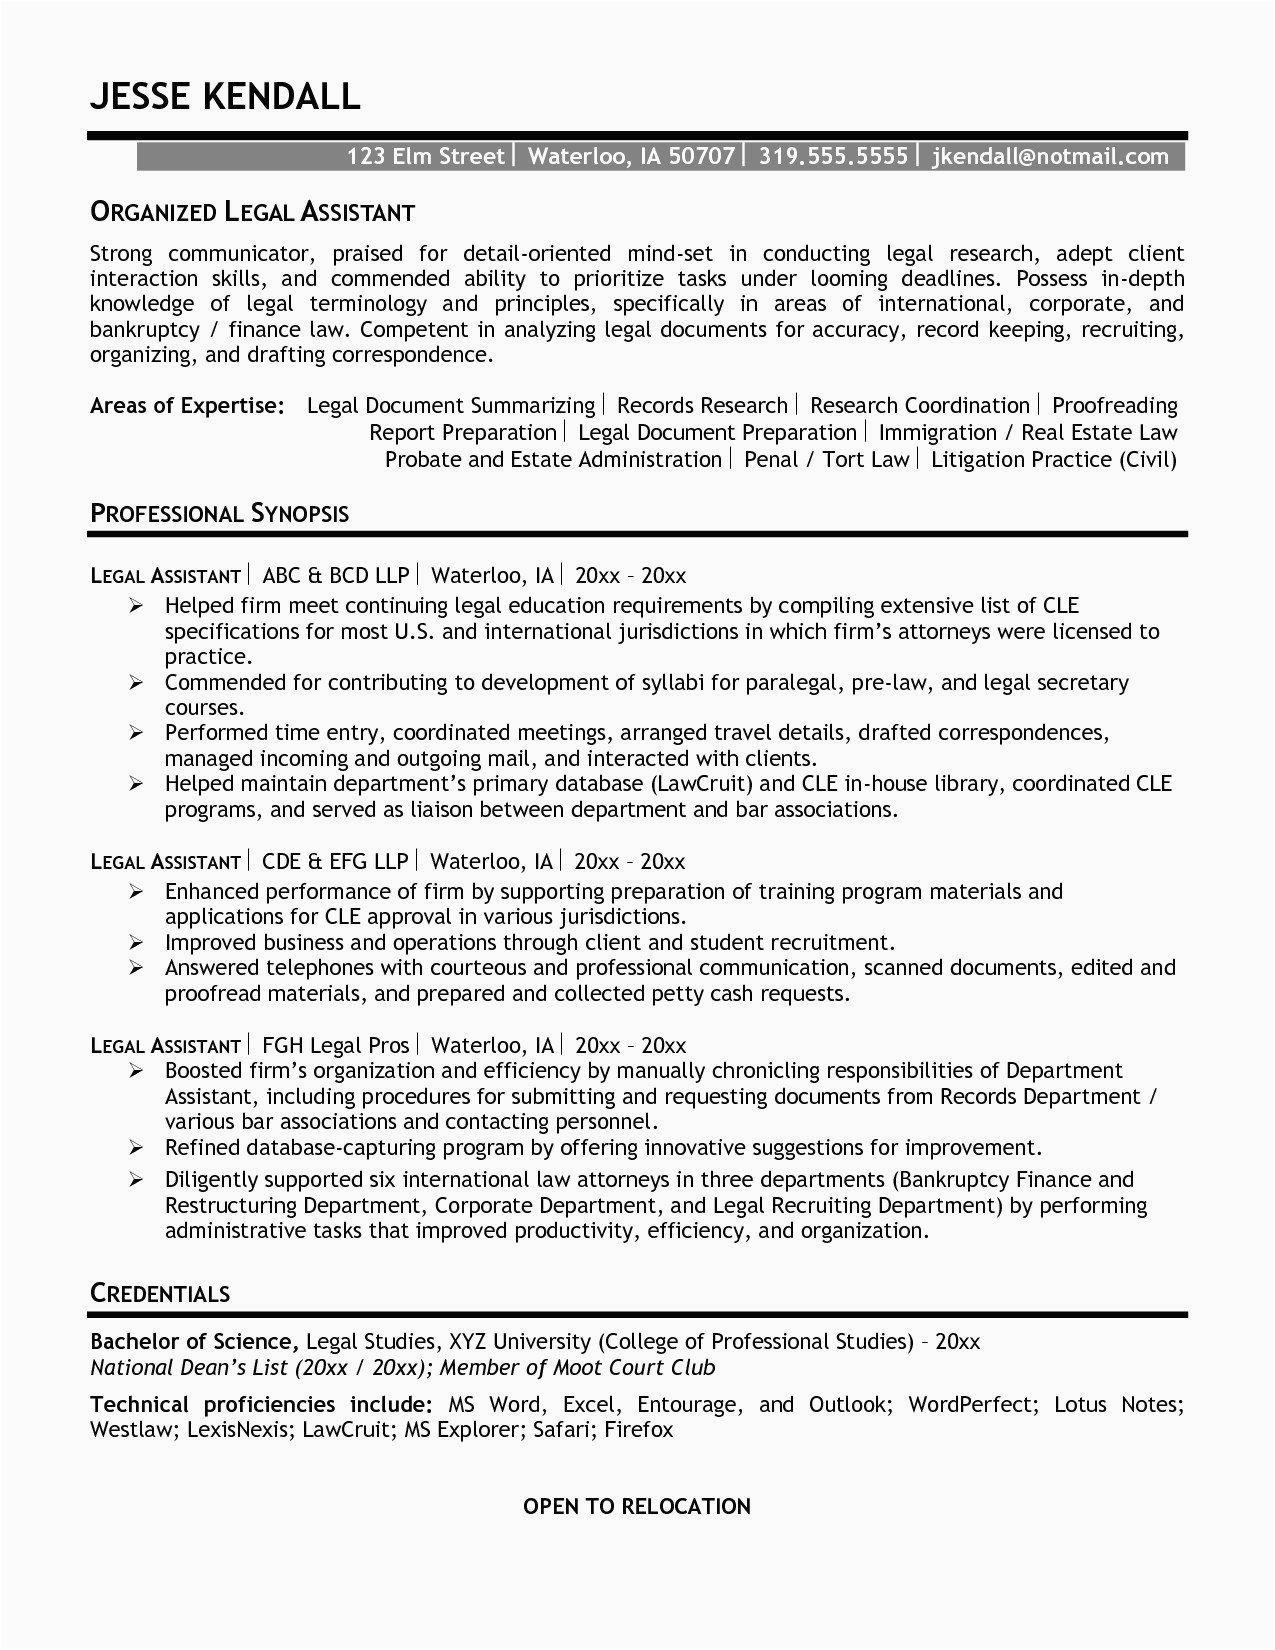 Sample College Student Resumes for Research Postition Undergraduate Research assistant Resume Sample 40 Real Estate